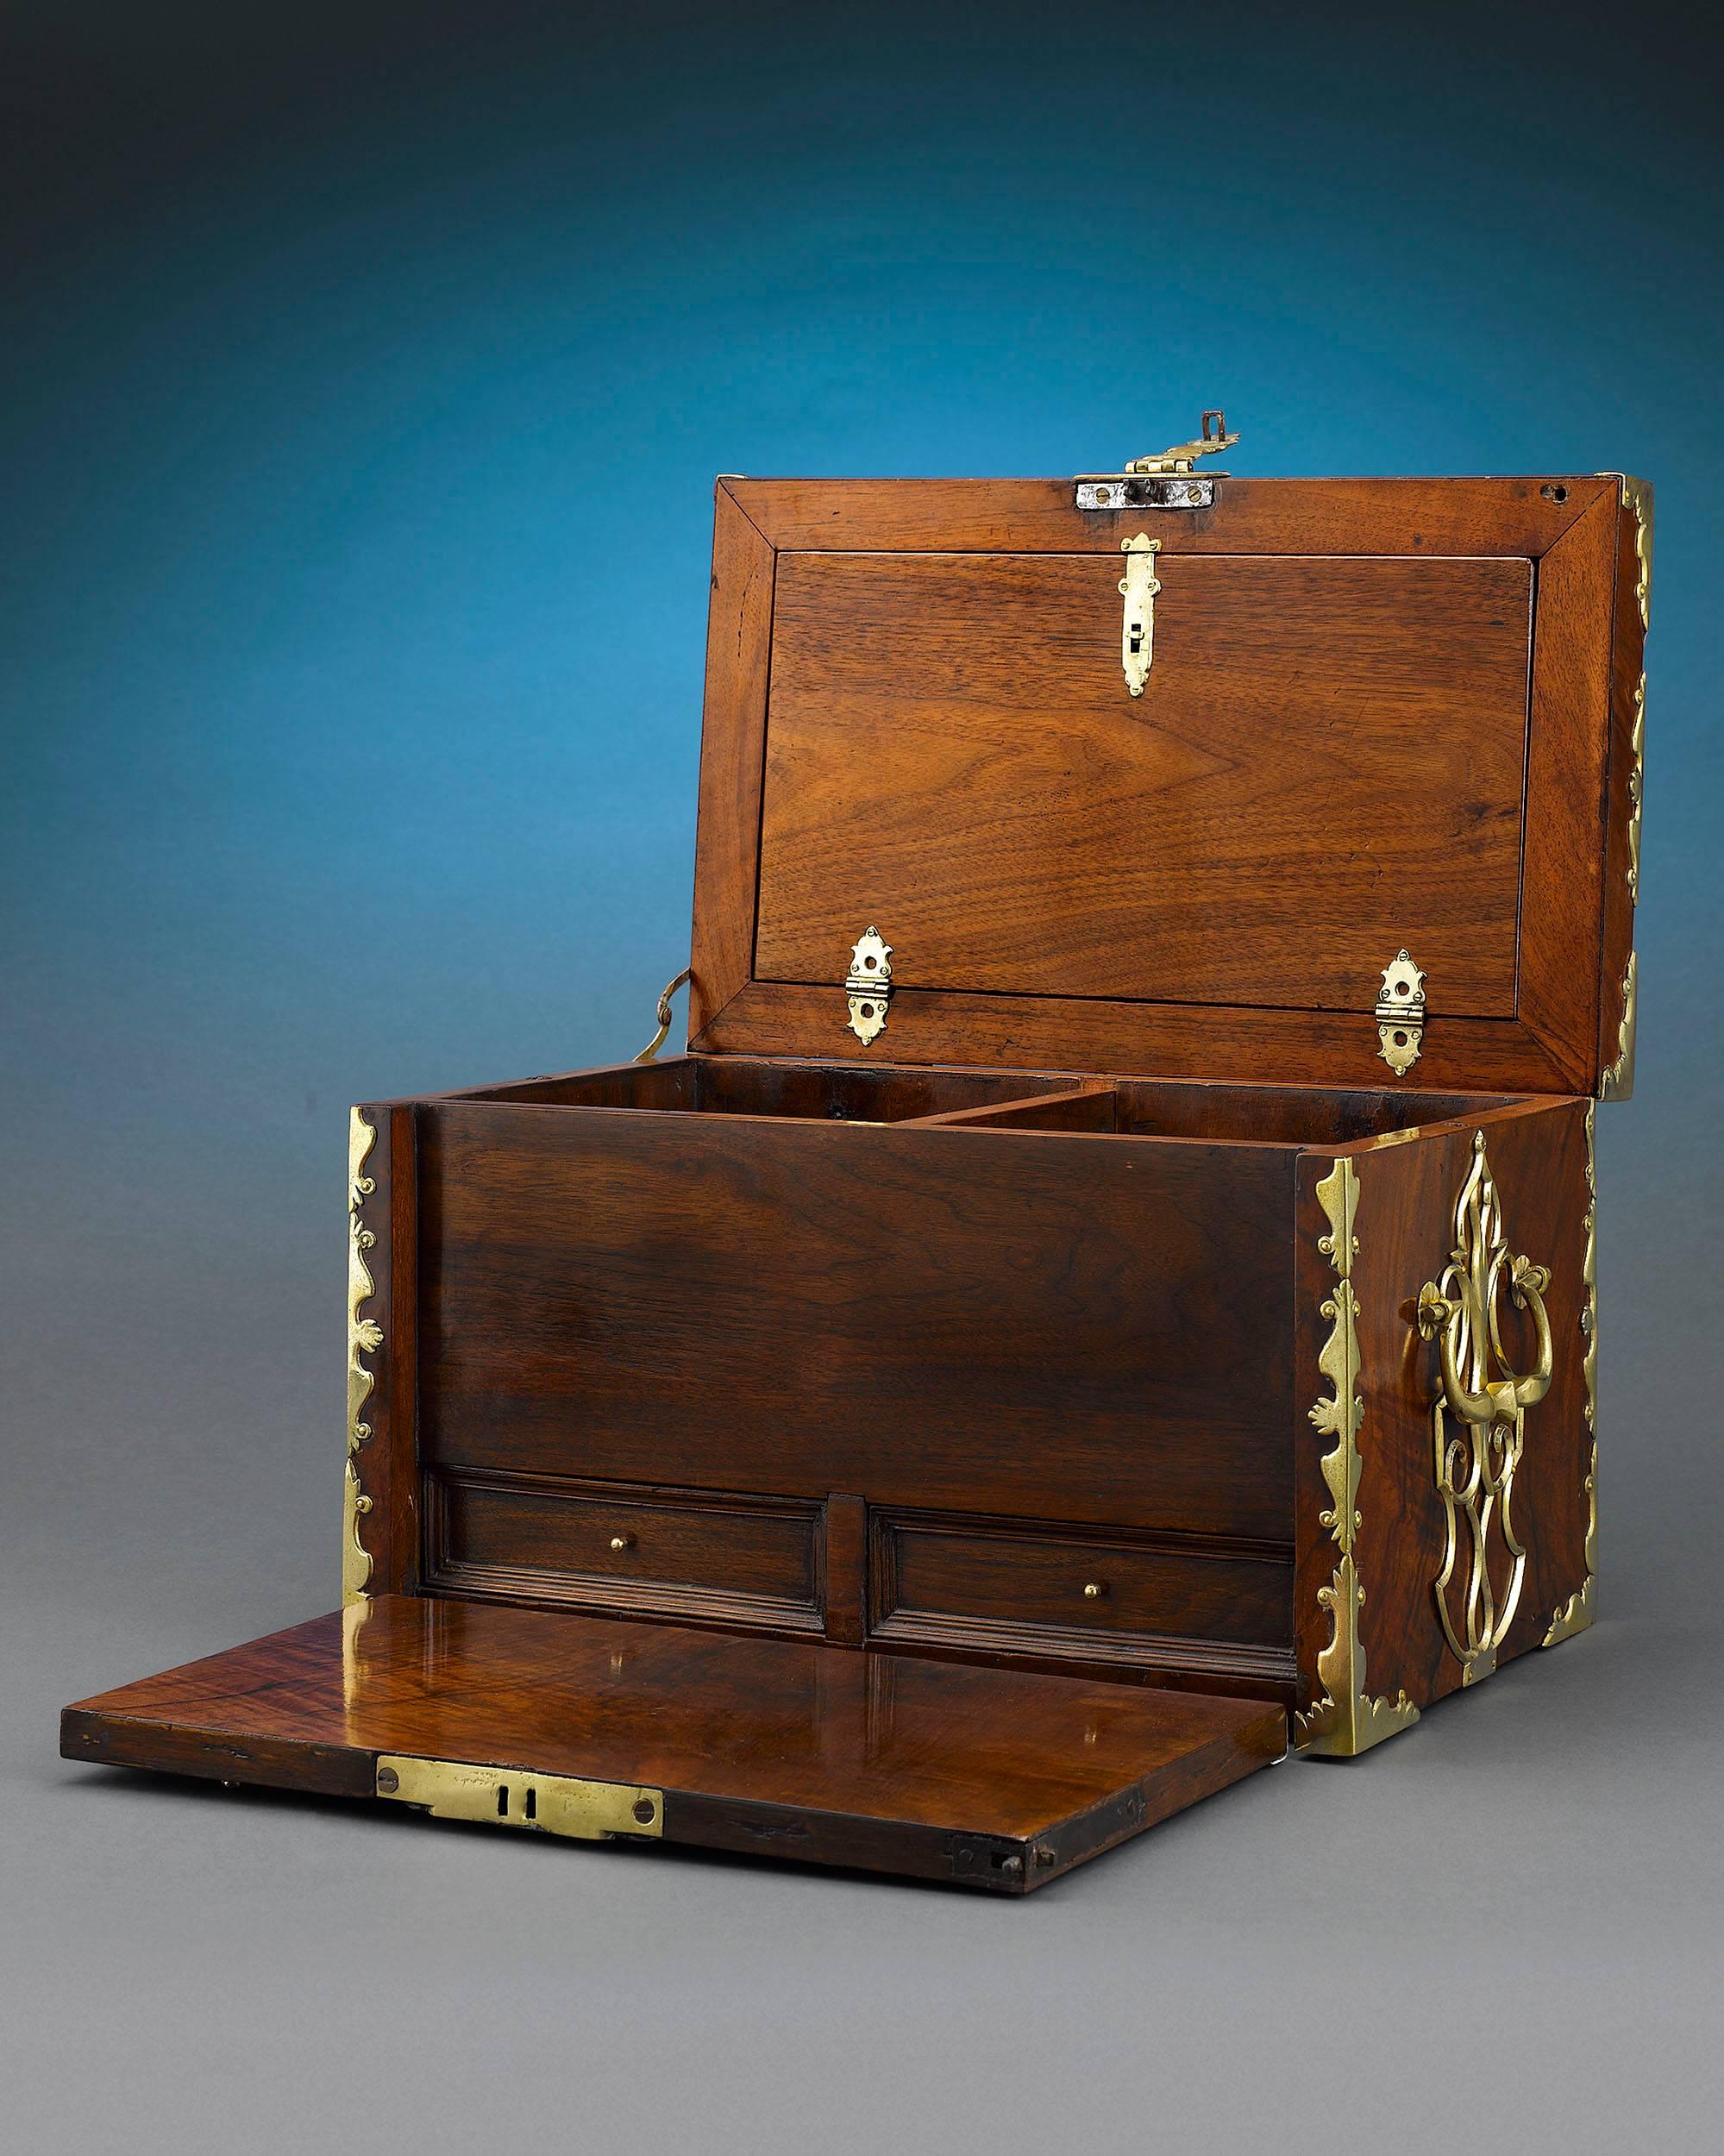 This impressive and rare British strong box is as versatile as it is beautiful. Crafted from a luxurious walnut veneer, it can be used as a jewelry box, as a humidor for one’s finest cigars, or to secure other valuable trinkets and treasures. The